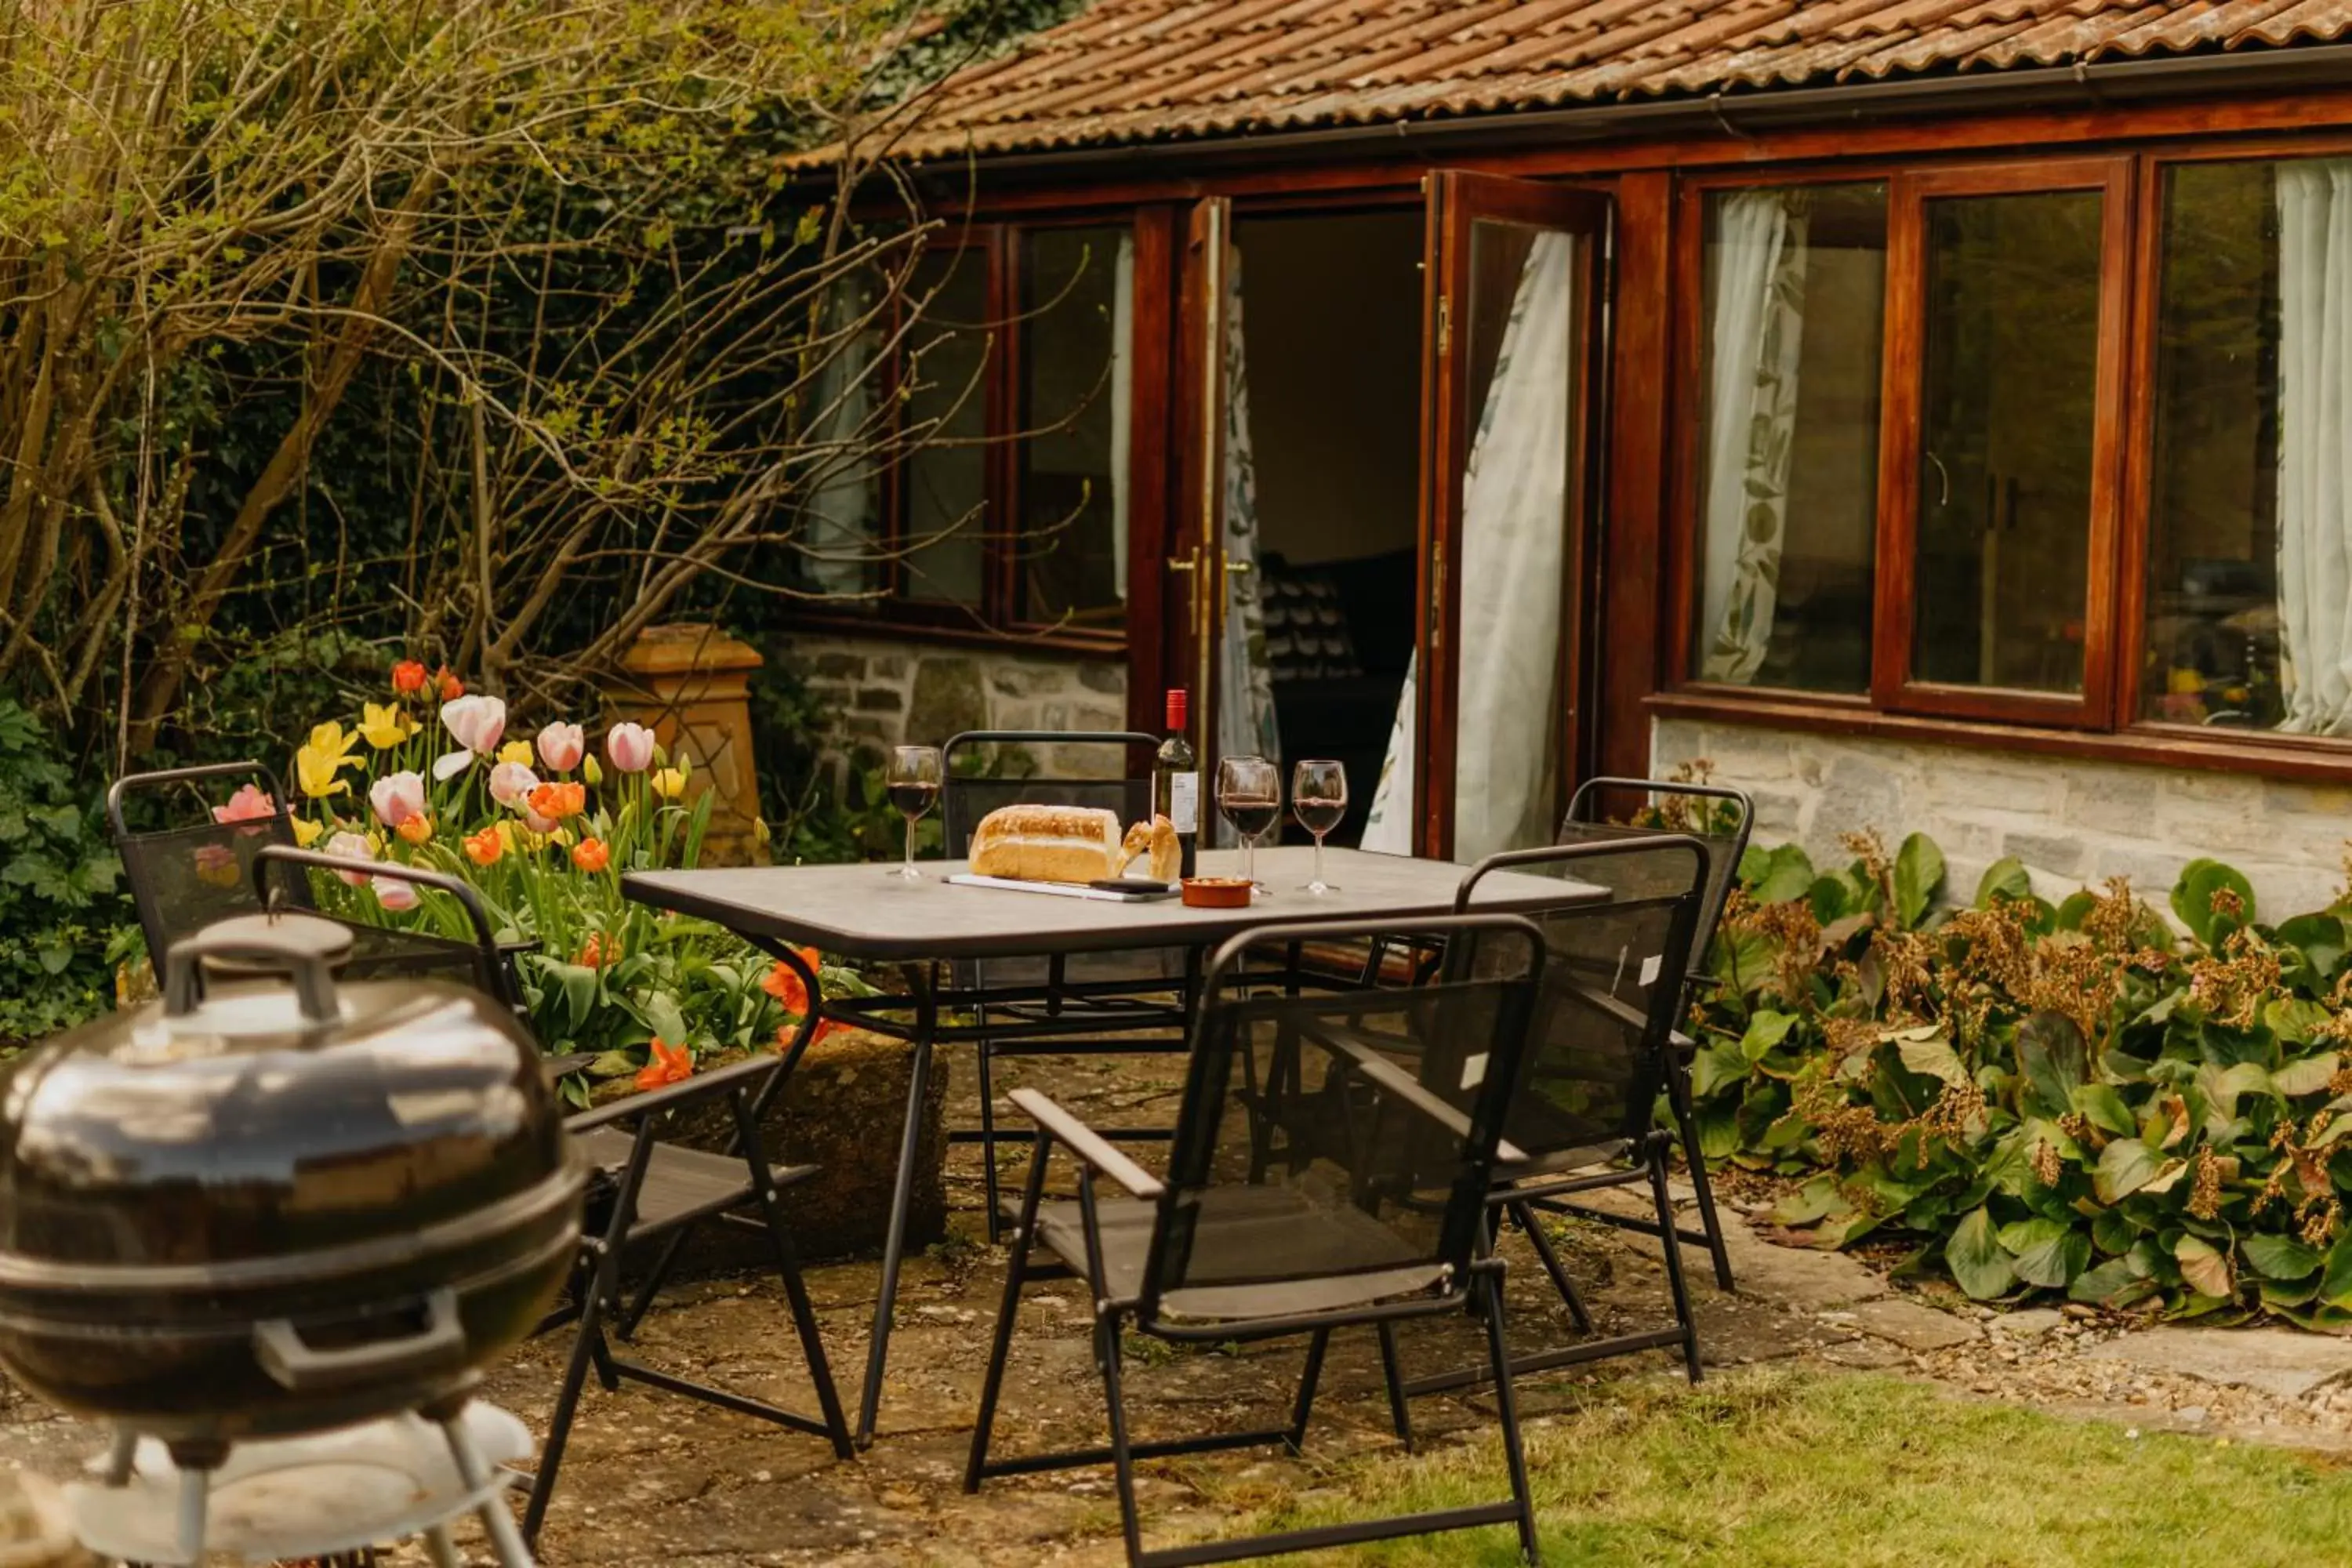 BBQ facilities in Little England Retreats - Cottage, Yurt and Shepherd Huts